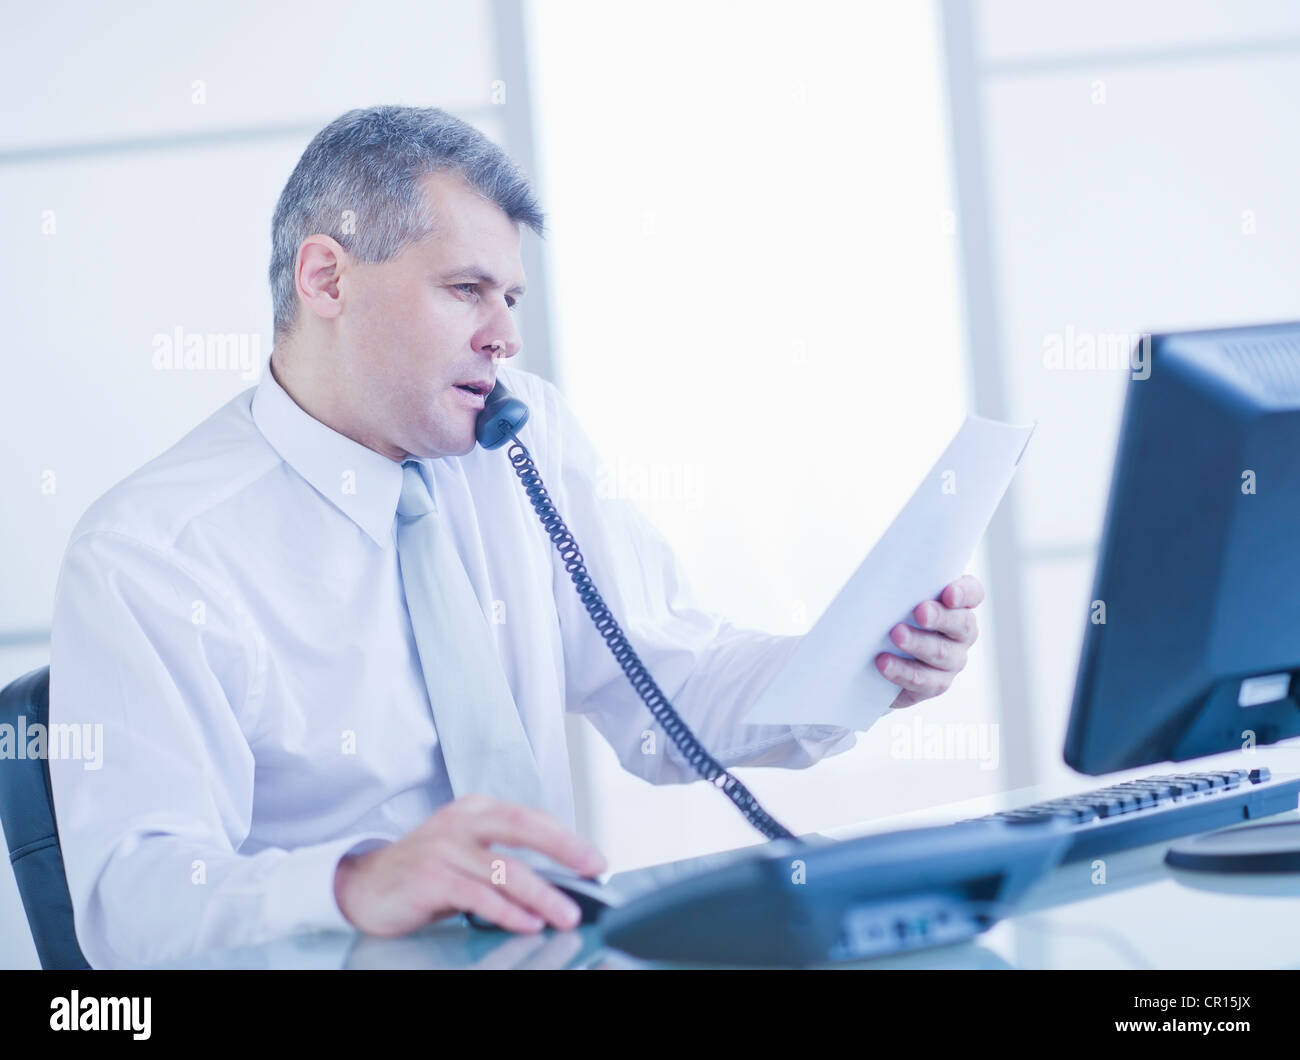 Man sitting in office and talking on landline phone Stock Photo